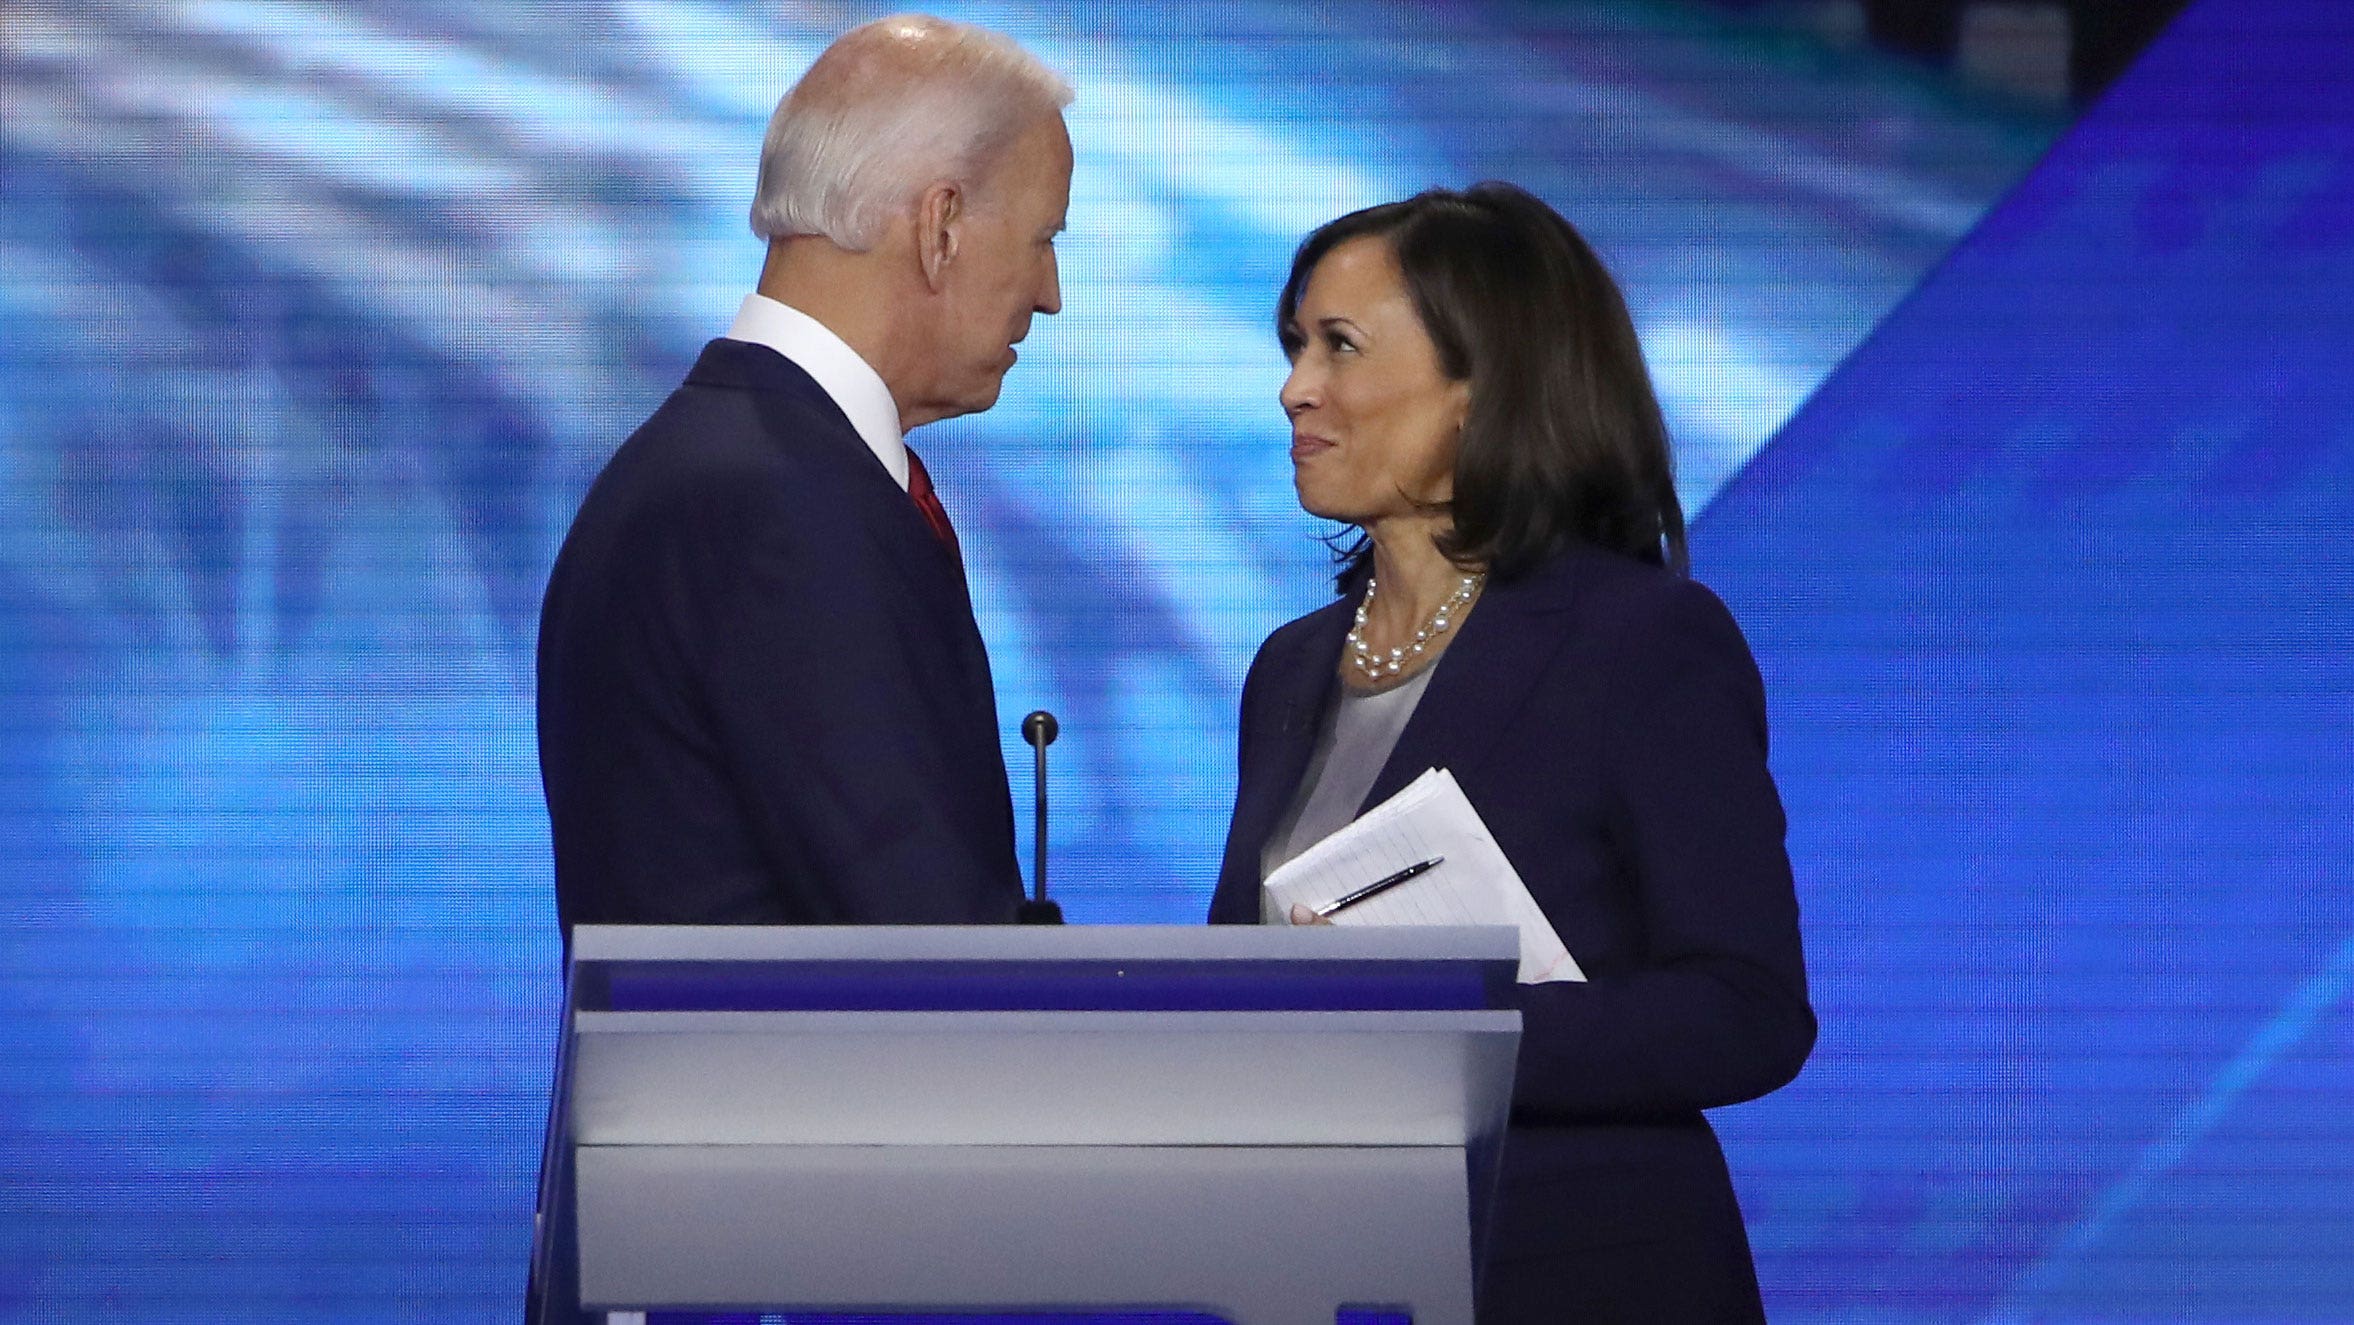 2024 poll: Only 9% of New Hampshire voters 'definitely' want Biden to run for president again